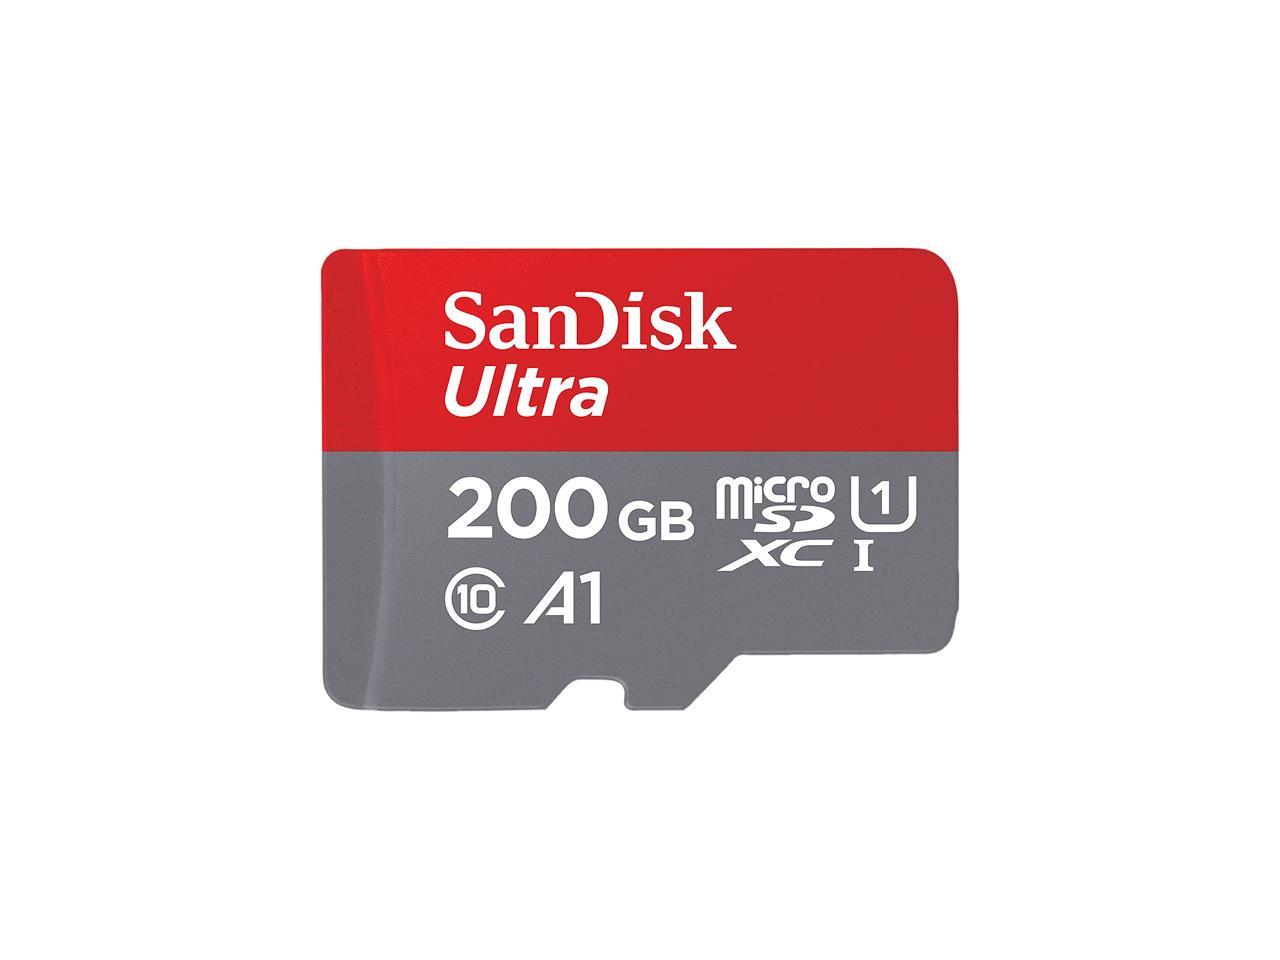 SanDisk Ultra 200GB MicroSDXC Verified for Xolo A500 by SanFlash 100MBs A1 U1 C10 Works with SanDisk 